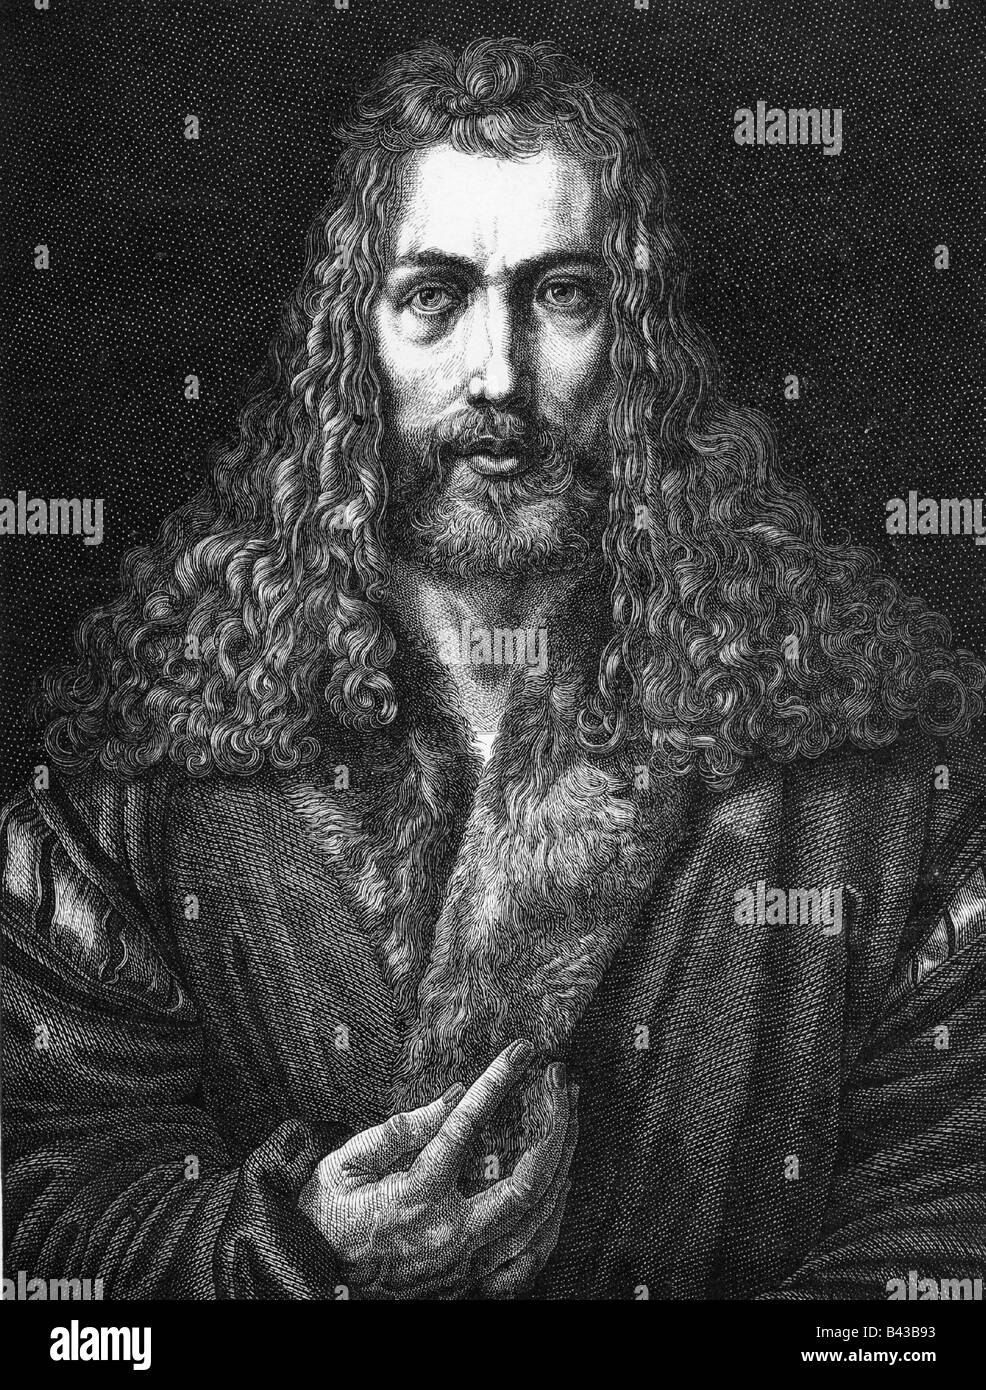 Dürer, Albrecht, 21.5.1471 - 6.4.1528, German painter and engraver, self-portrait, wood engraving by F. W. Bader, based on a drawing by Josef Schoenbrunner, Artist's Copyright has not to be cleared Stock Photo